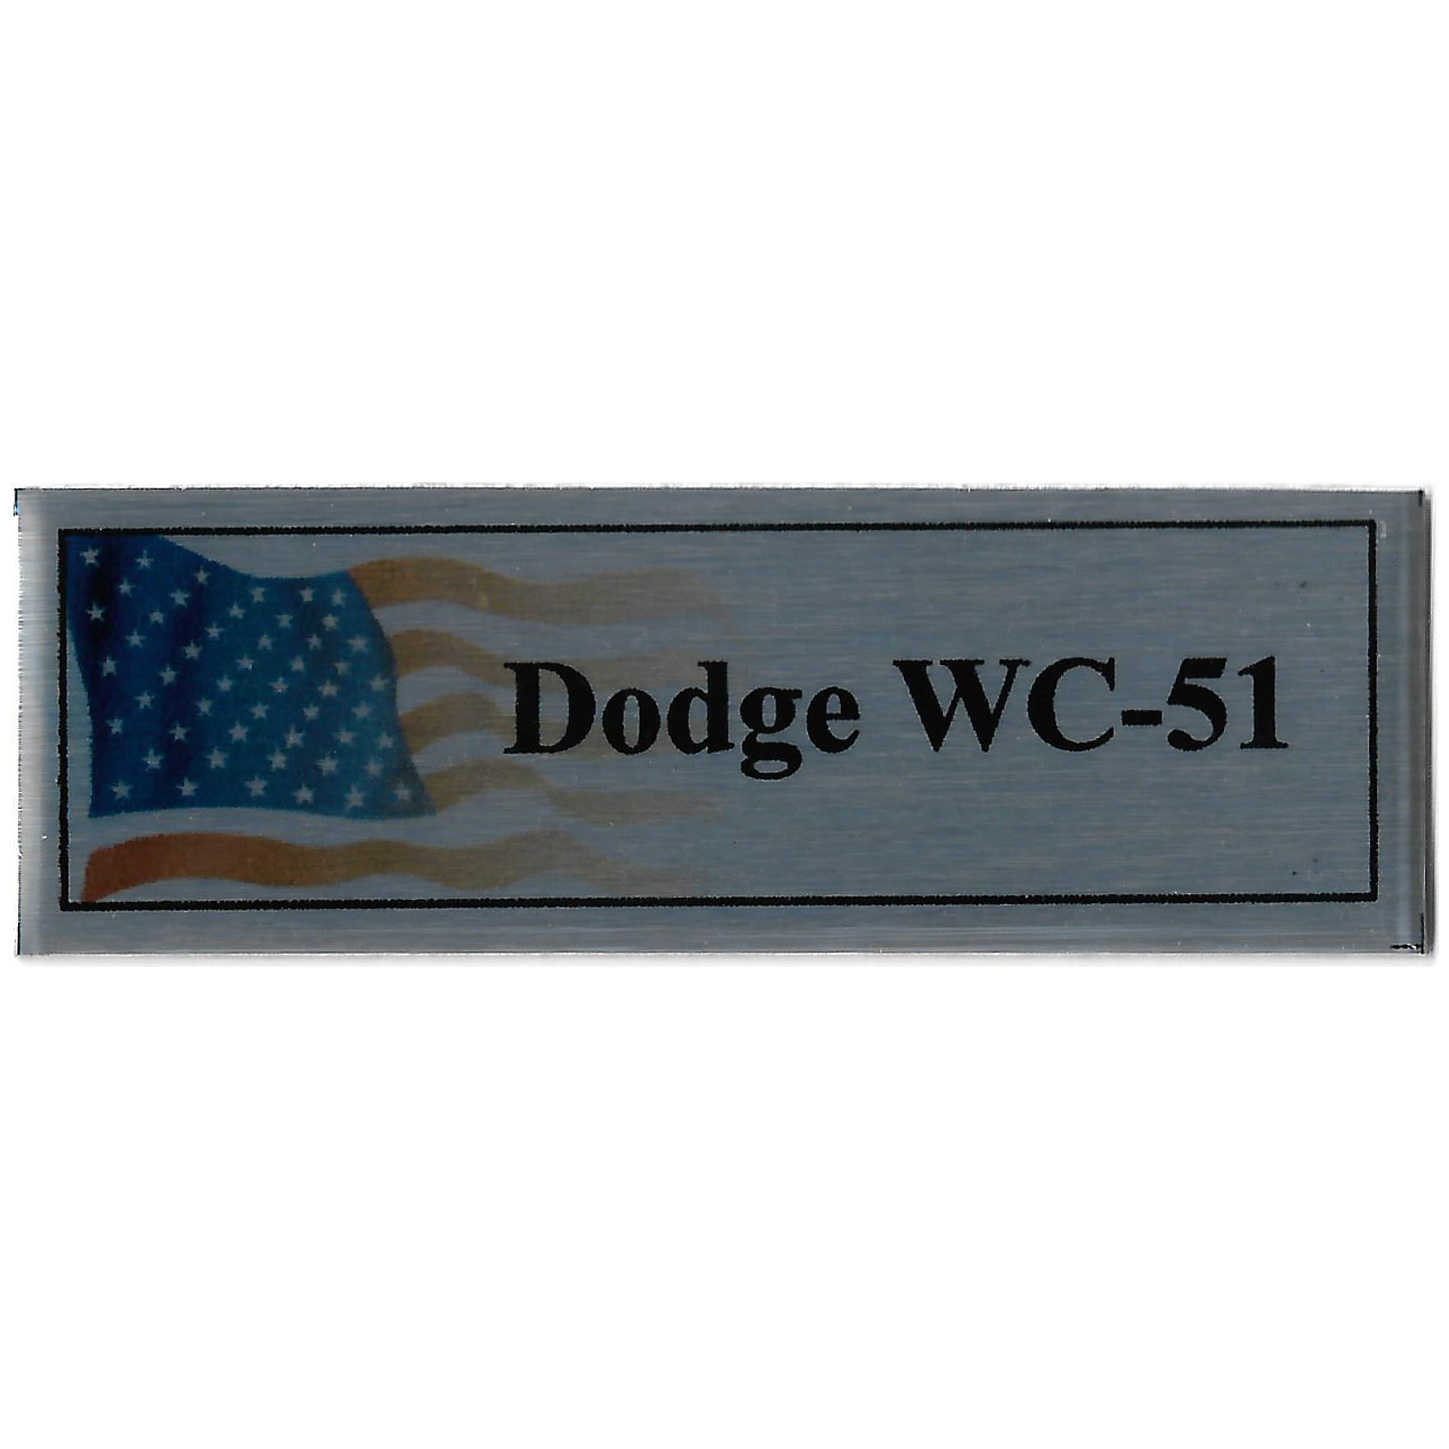 T367 Plate Plate for the American Army car Dodge WC-51, 60x20 mm, silver, US flag